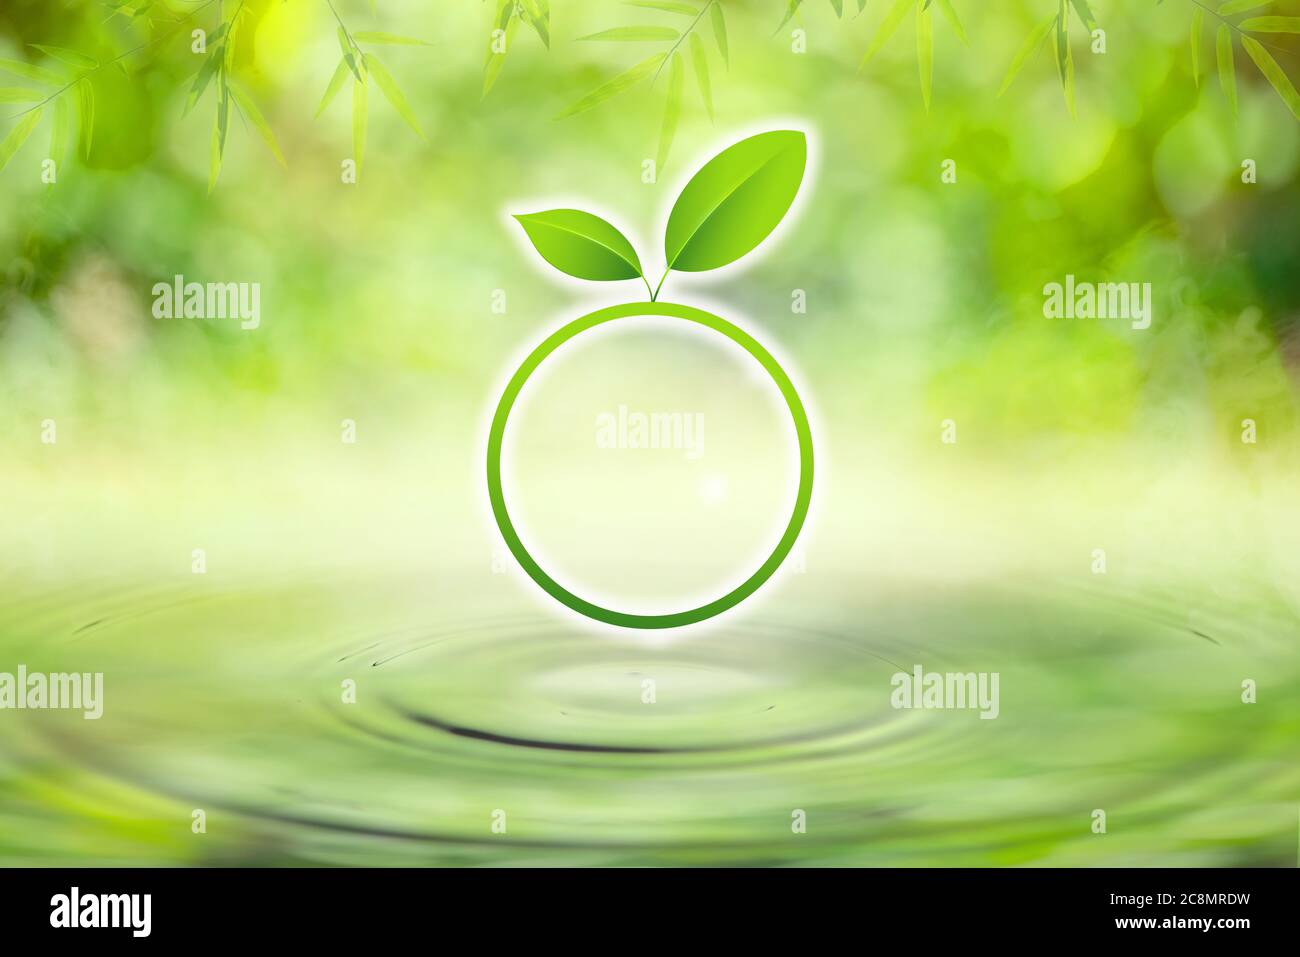 Green leaf circle on drop falling in water with ripples with light green bokeh background. Stock Photo